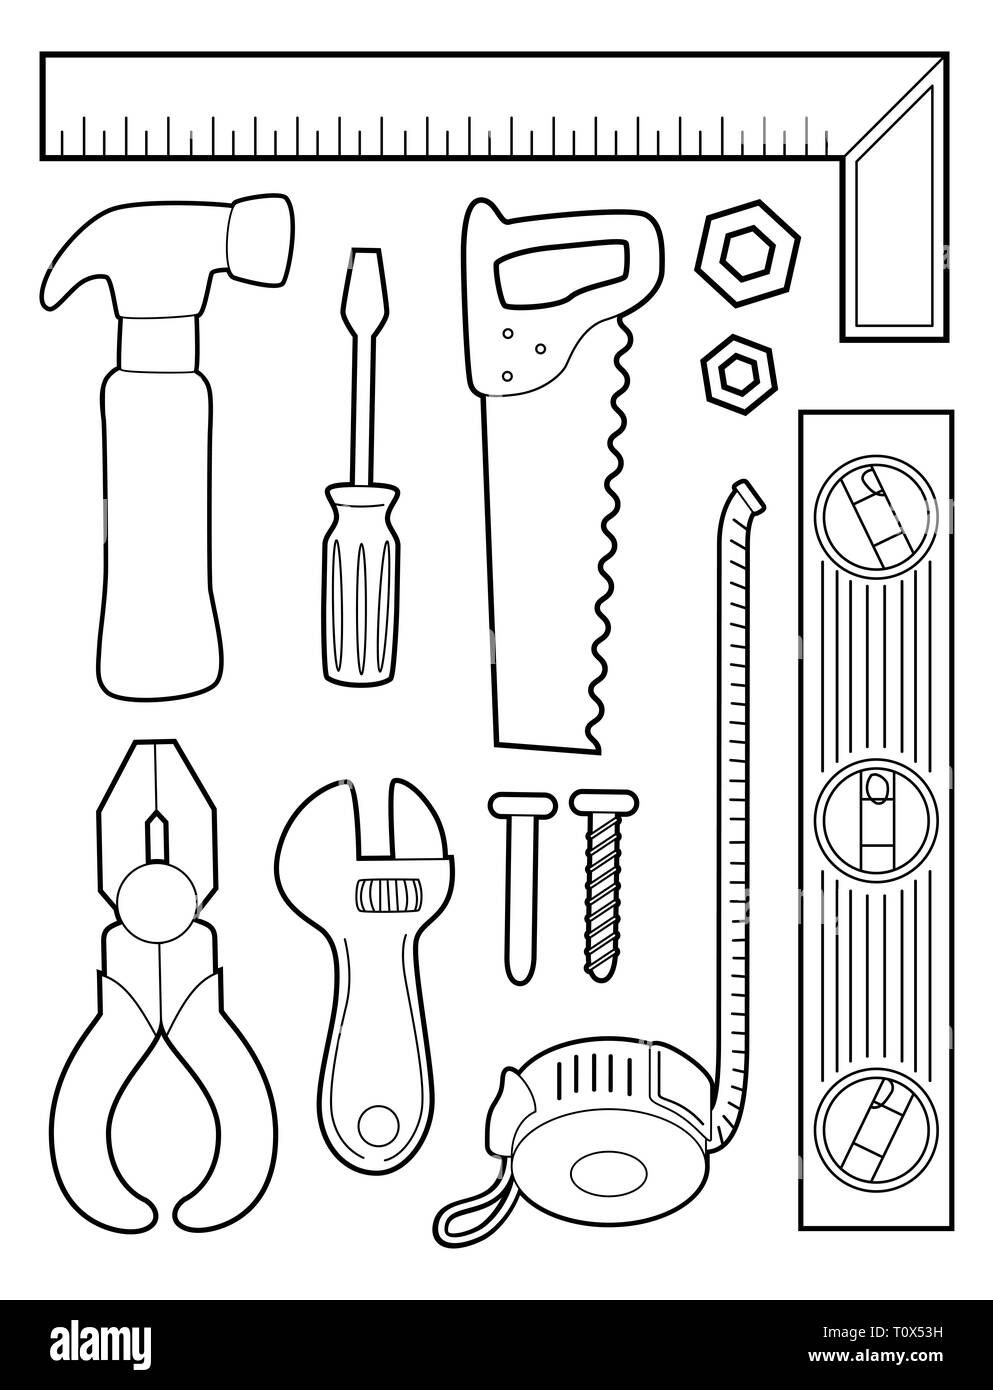 Illustration of a Coloring Page of Different Construction Tools from Ruler, Hammer, Screwdriver, Saw, Pliers to Measuring Tape Stock Photo